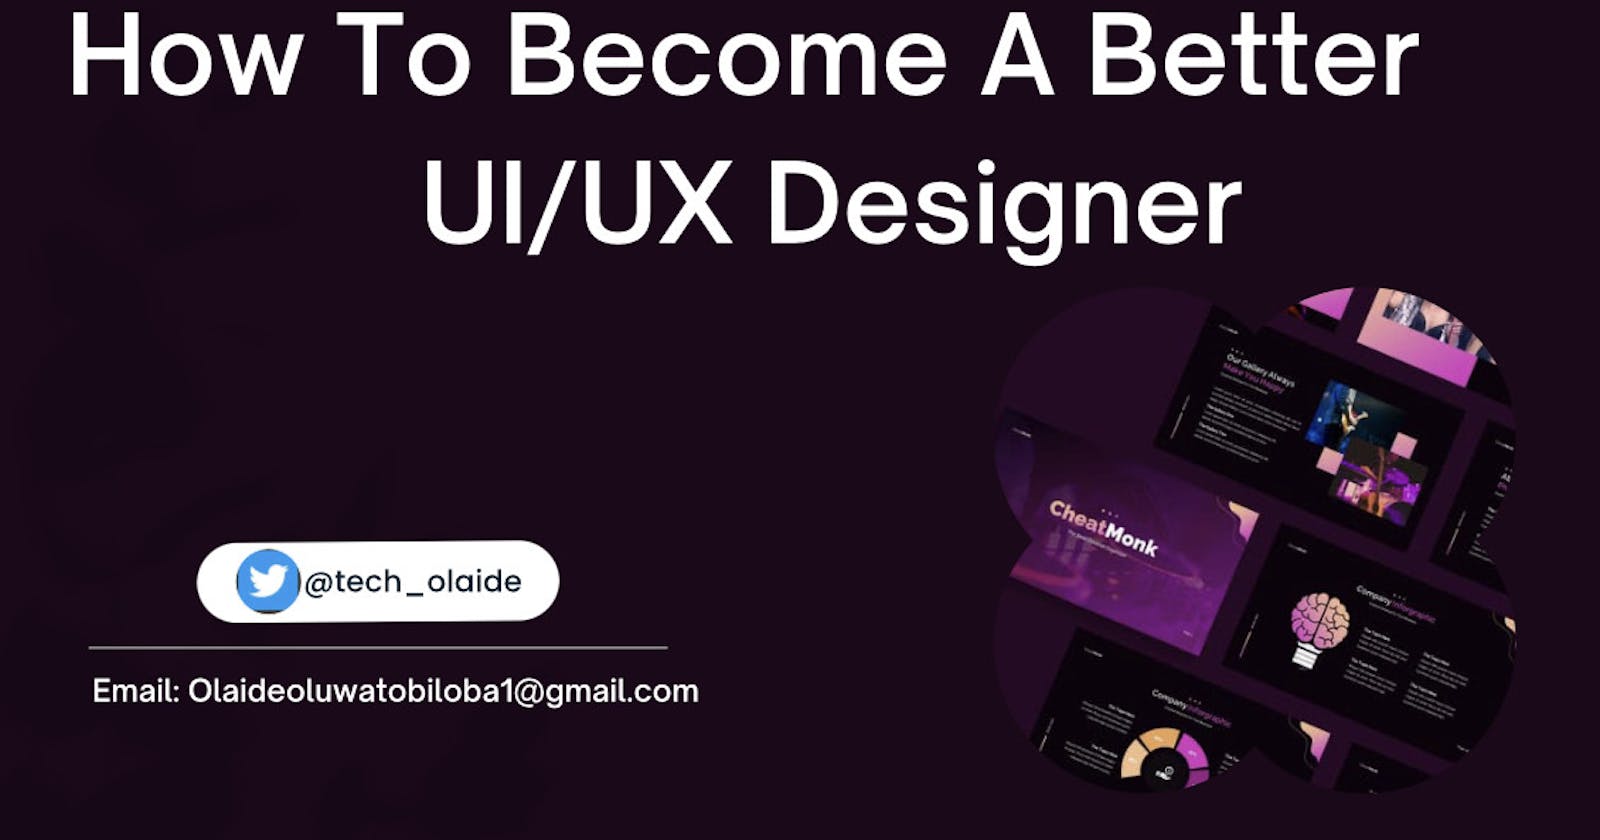 How To Become A Better UI/UX Designer